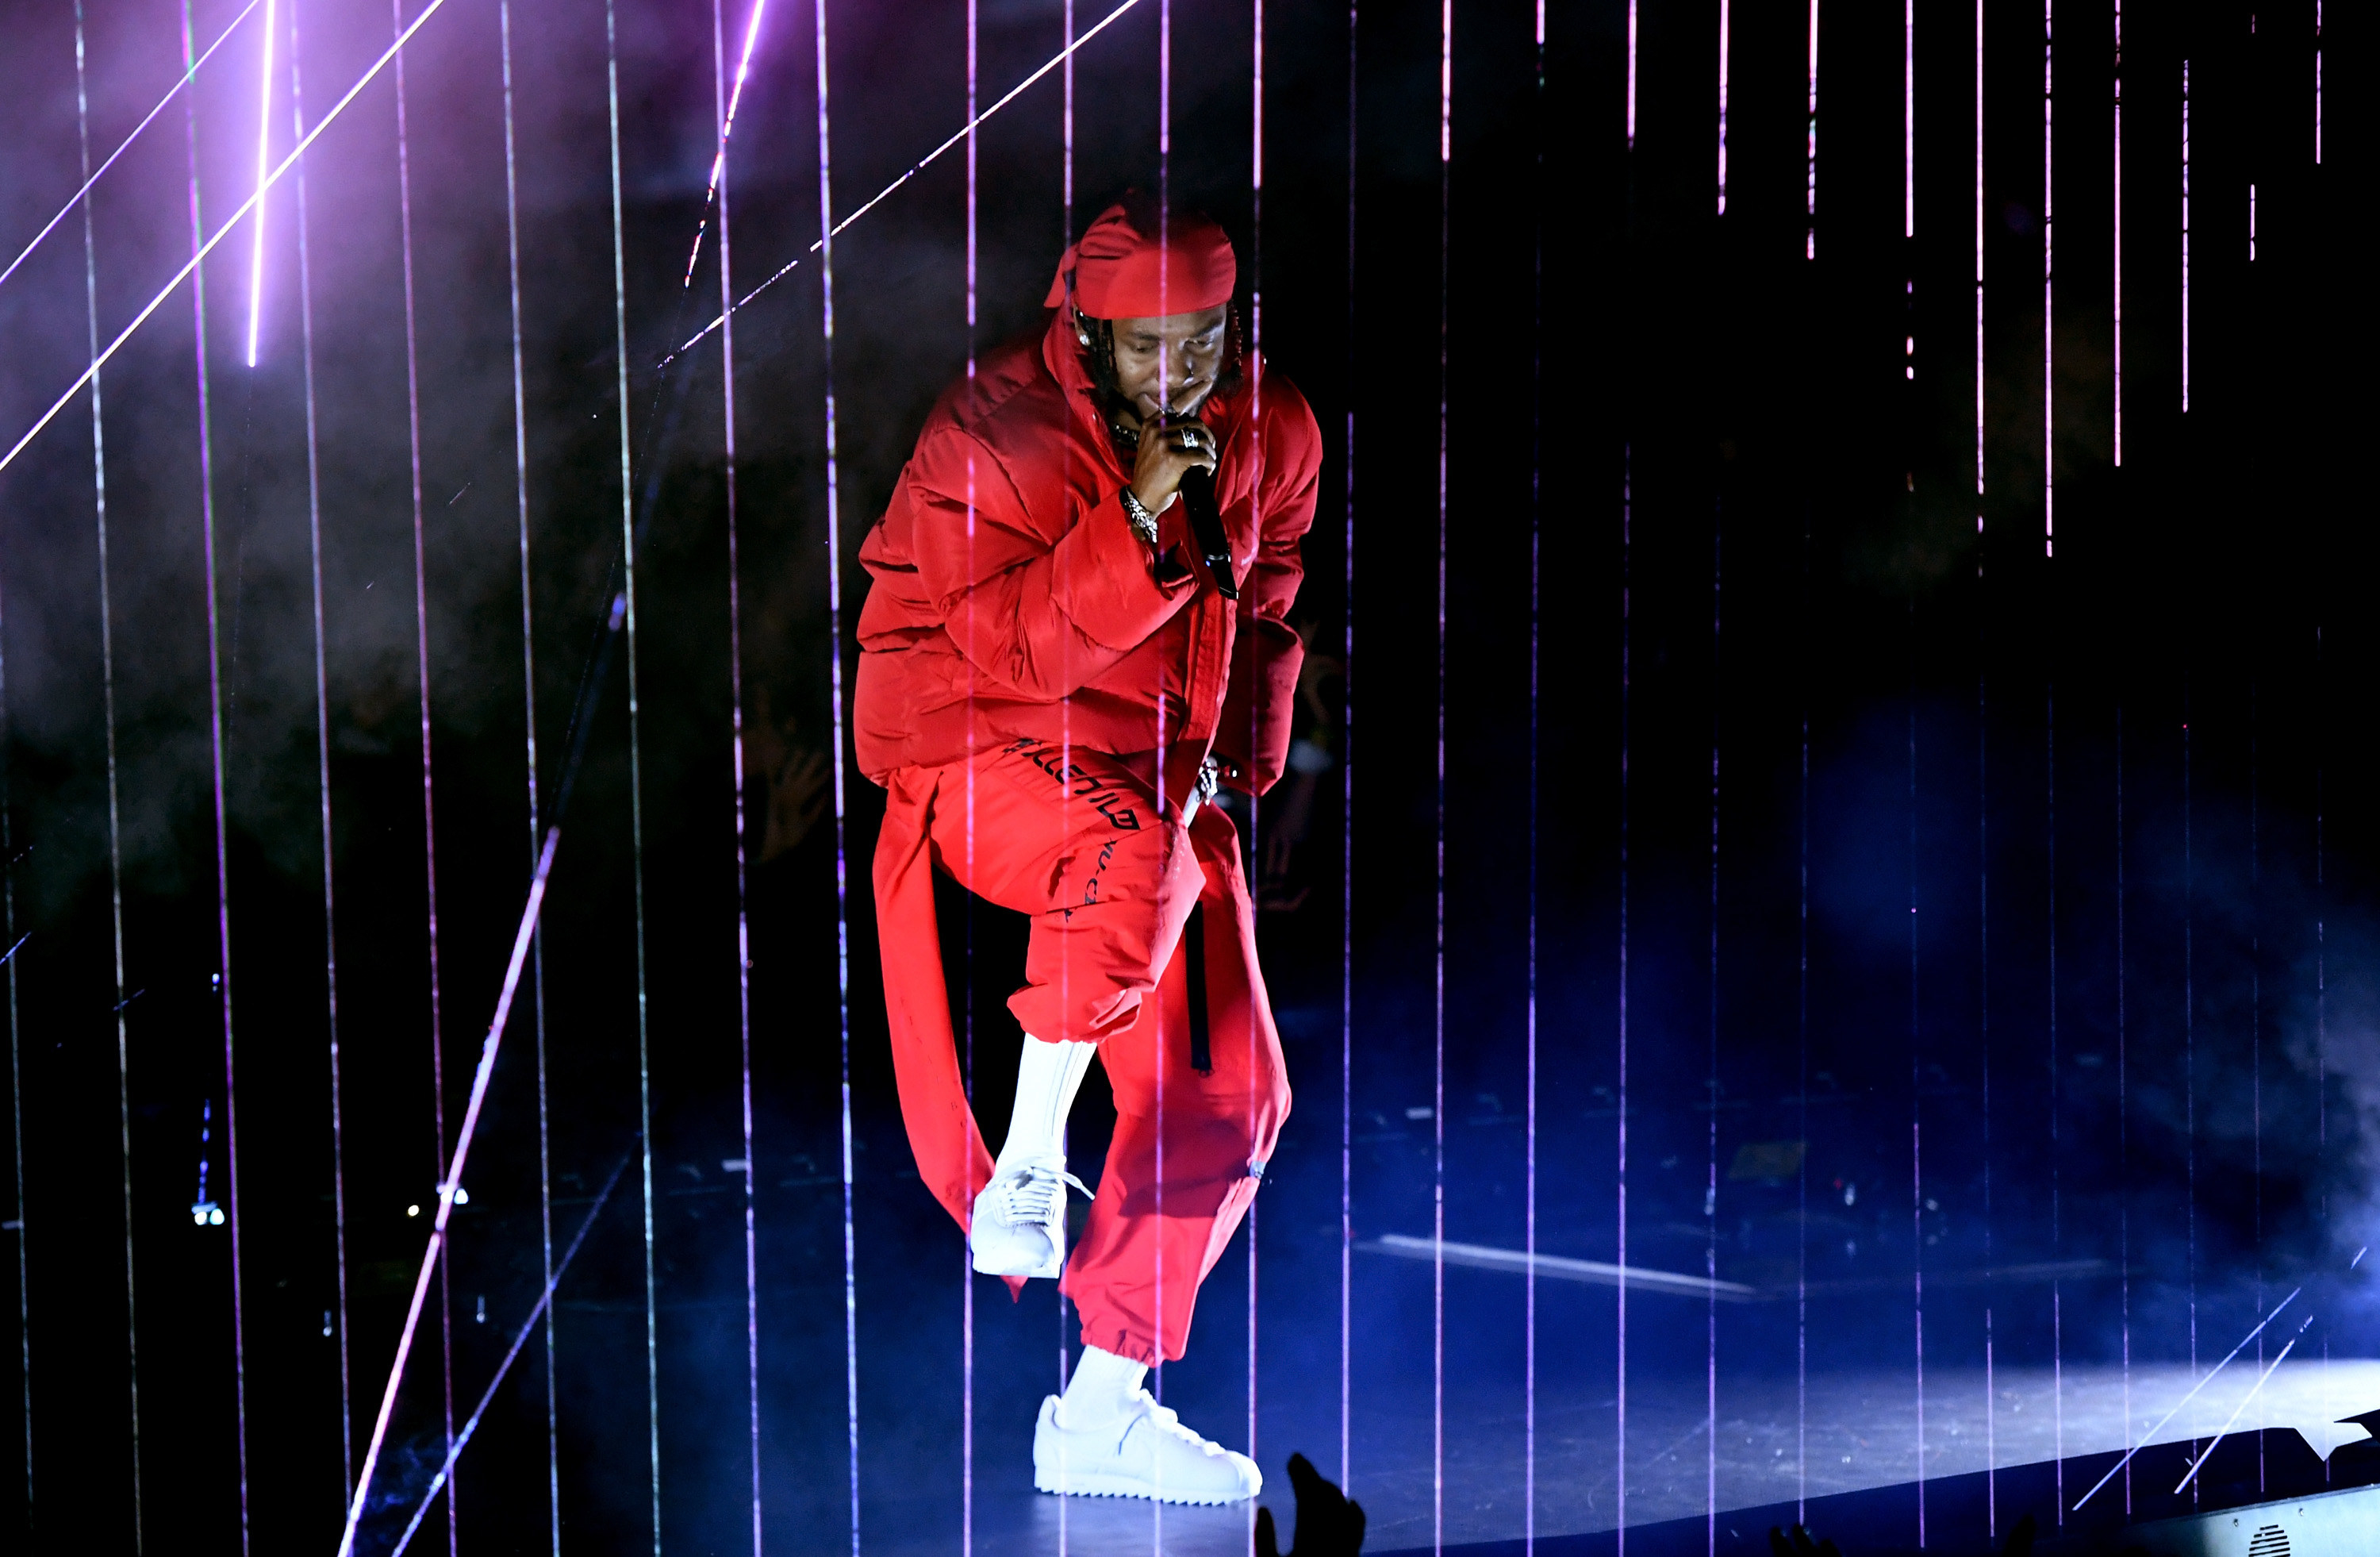 Kendrick Lamar performs onstage surrounded by lazor beams during the 2017 MTV Video Music Awards at The Forum on August 27, 2017 in Inglewood, California.